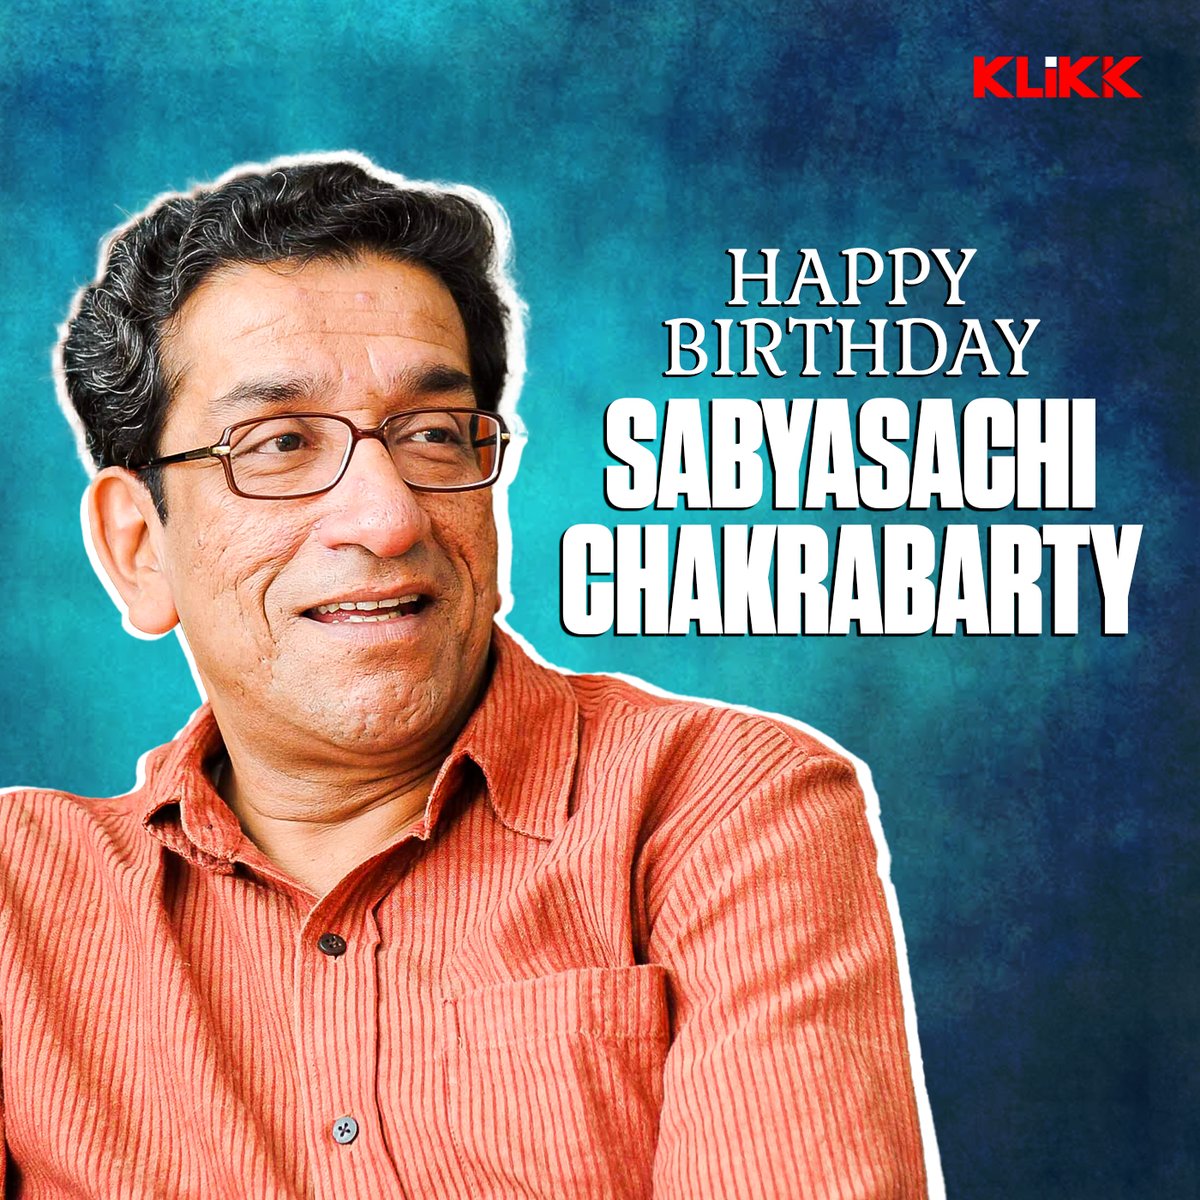 Wishing the brilliant and versatile actor Sabyasachi Chakrabarty a very Happy Birthday! Your talent has enriched our screens and our hearts.🌟#SabyasachiChakrabarty #Klikk